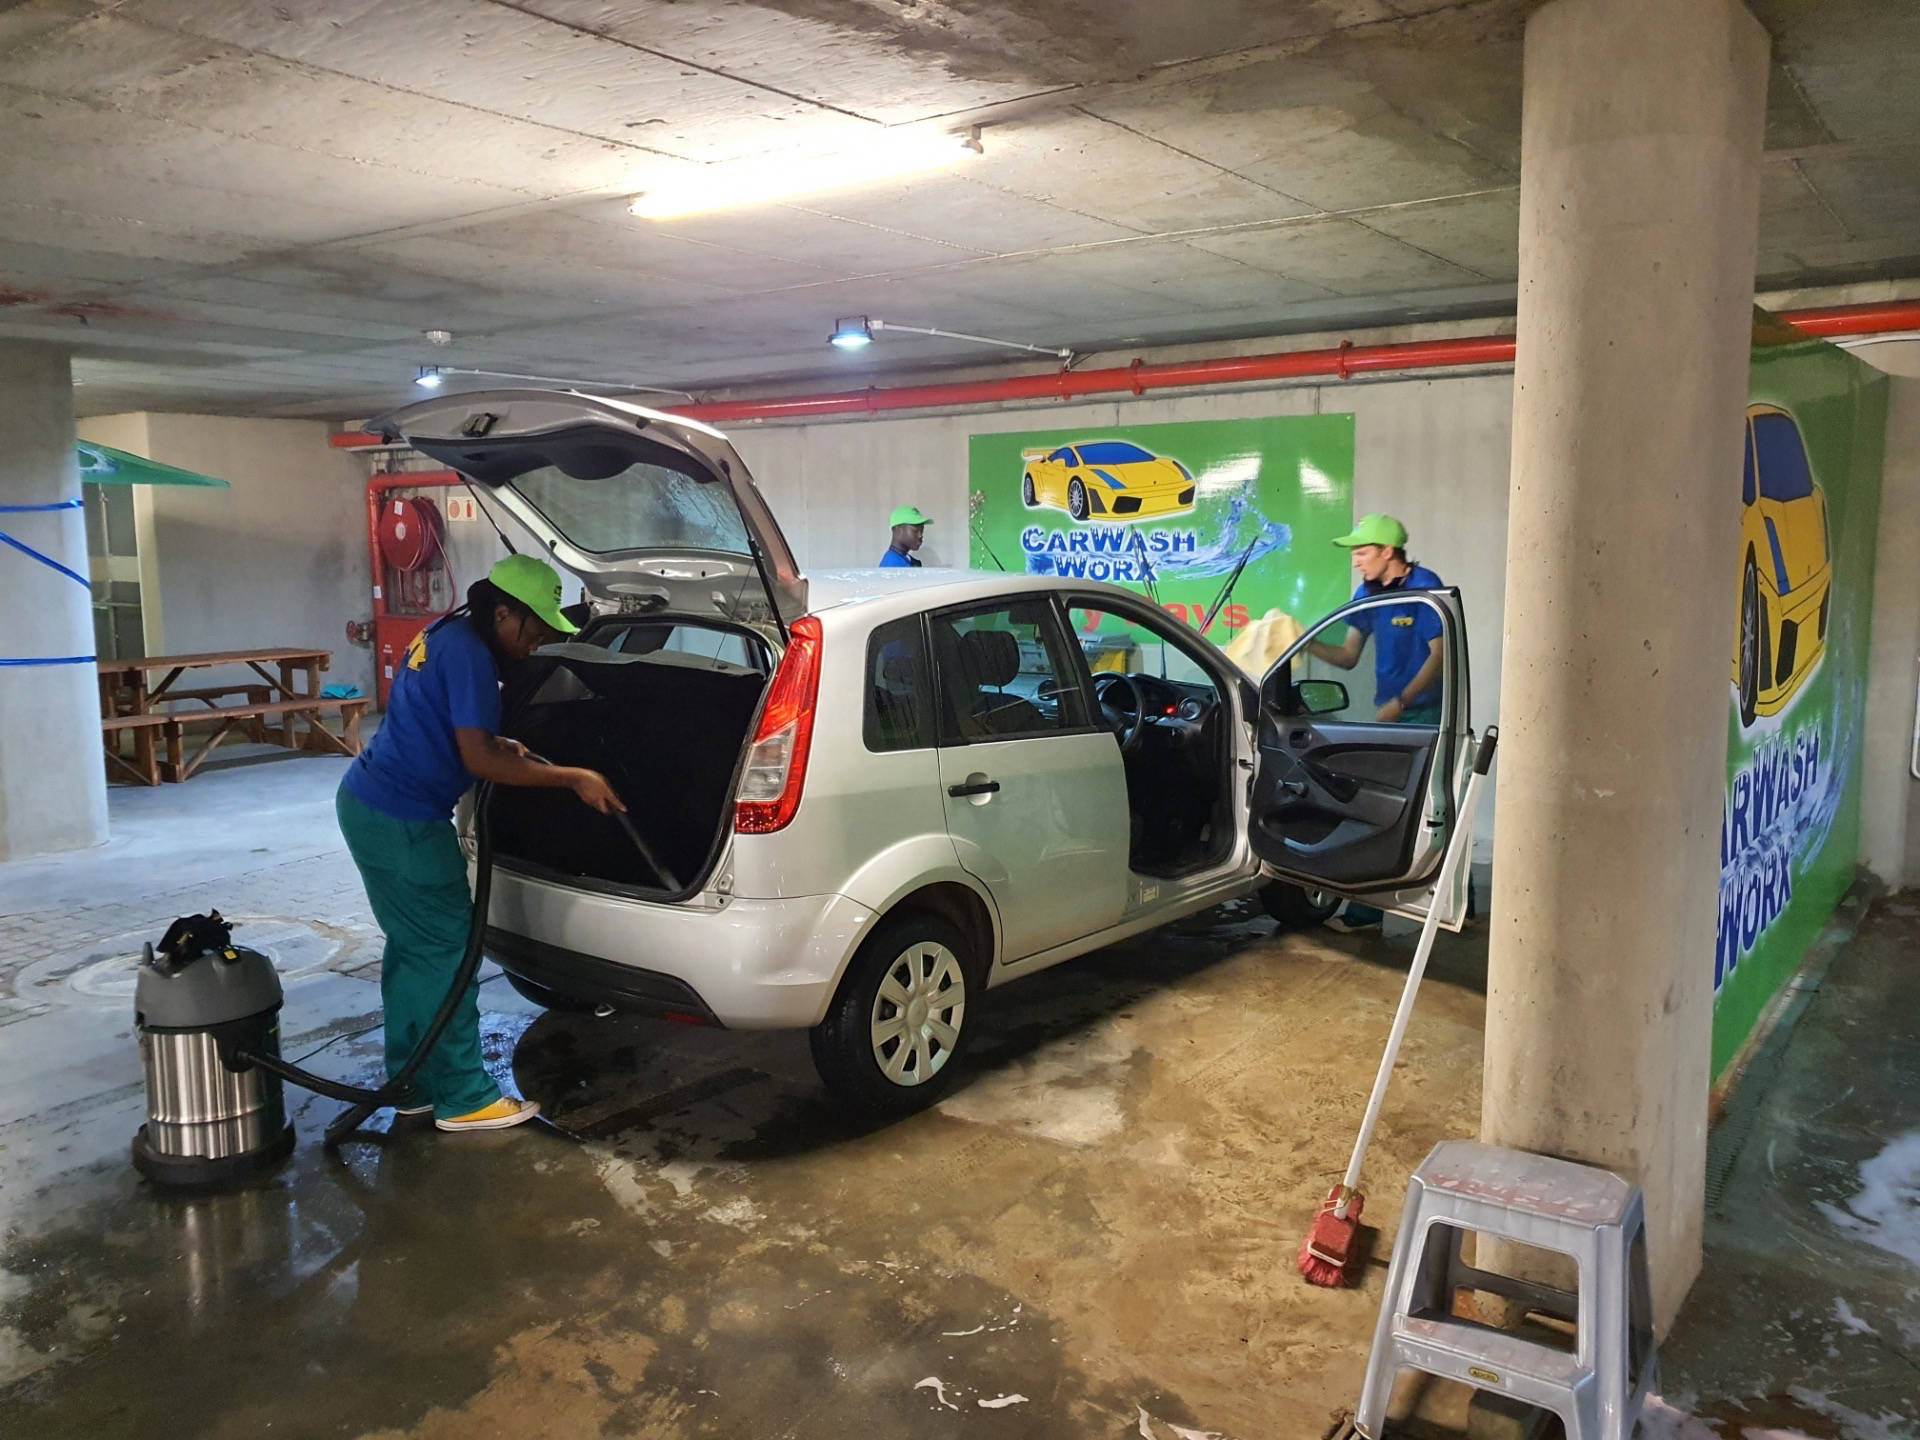 CarWash Worx Bryanston, Franchises Available, CarWash Worx Head Office, Join The Leading Car Wash Franchising Group, Start Your Own Successful Car Wash Business Now